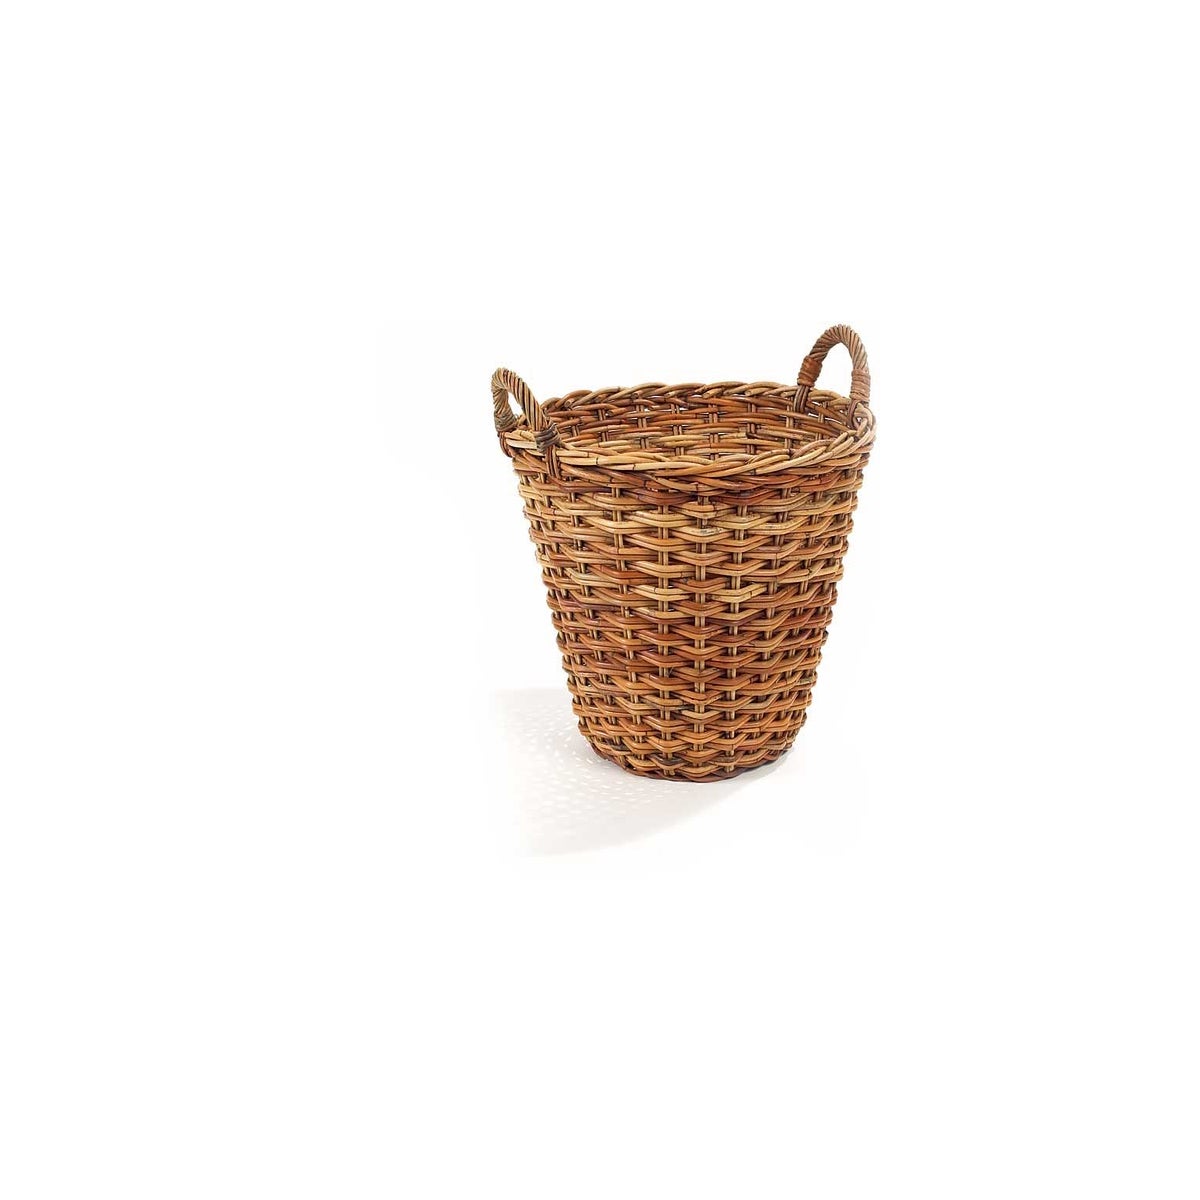 French Market Baskets – Made in Provence